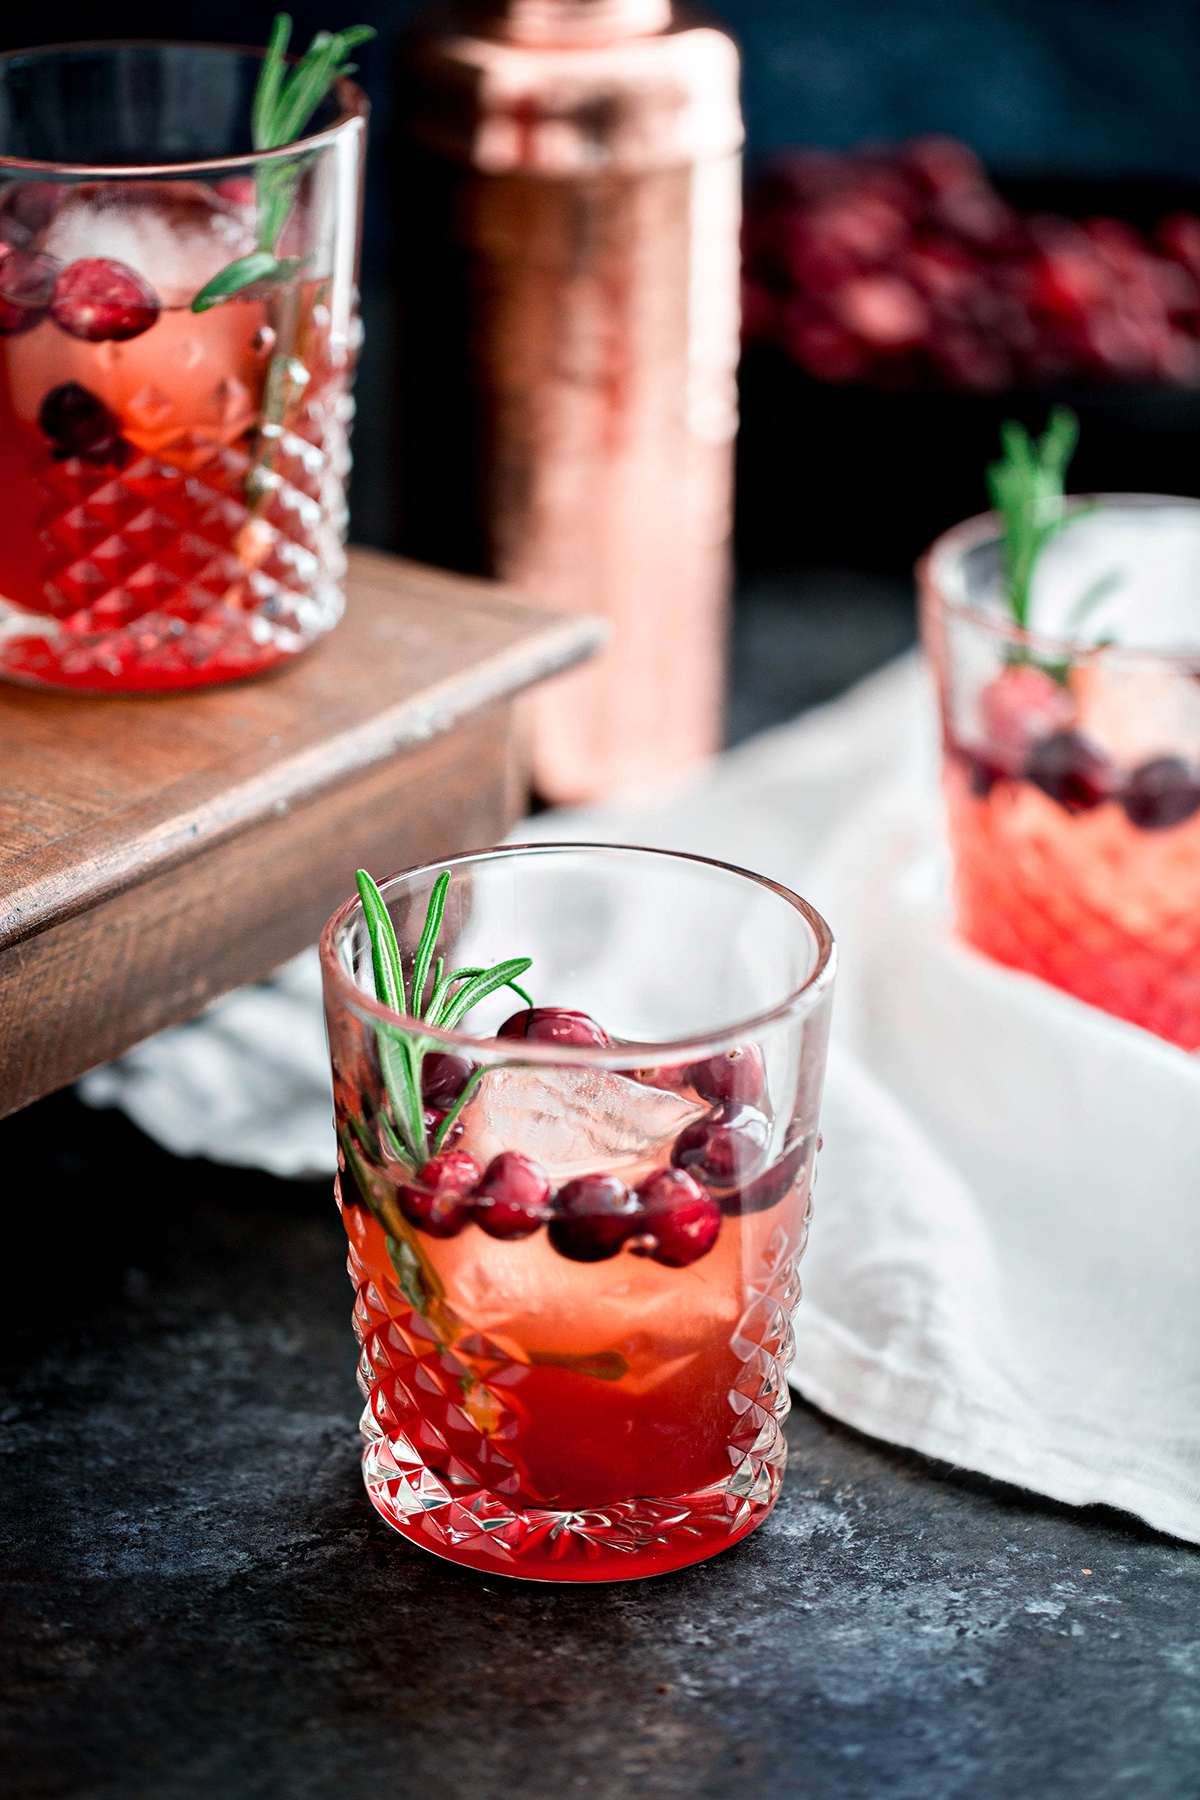 Cranberry Ice Cubes - A Recipe For Fun